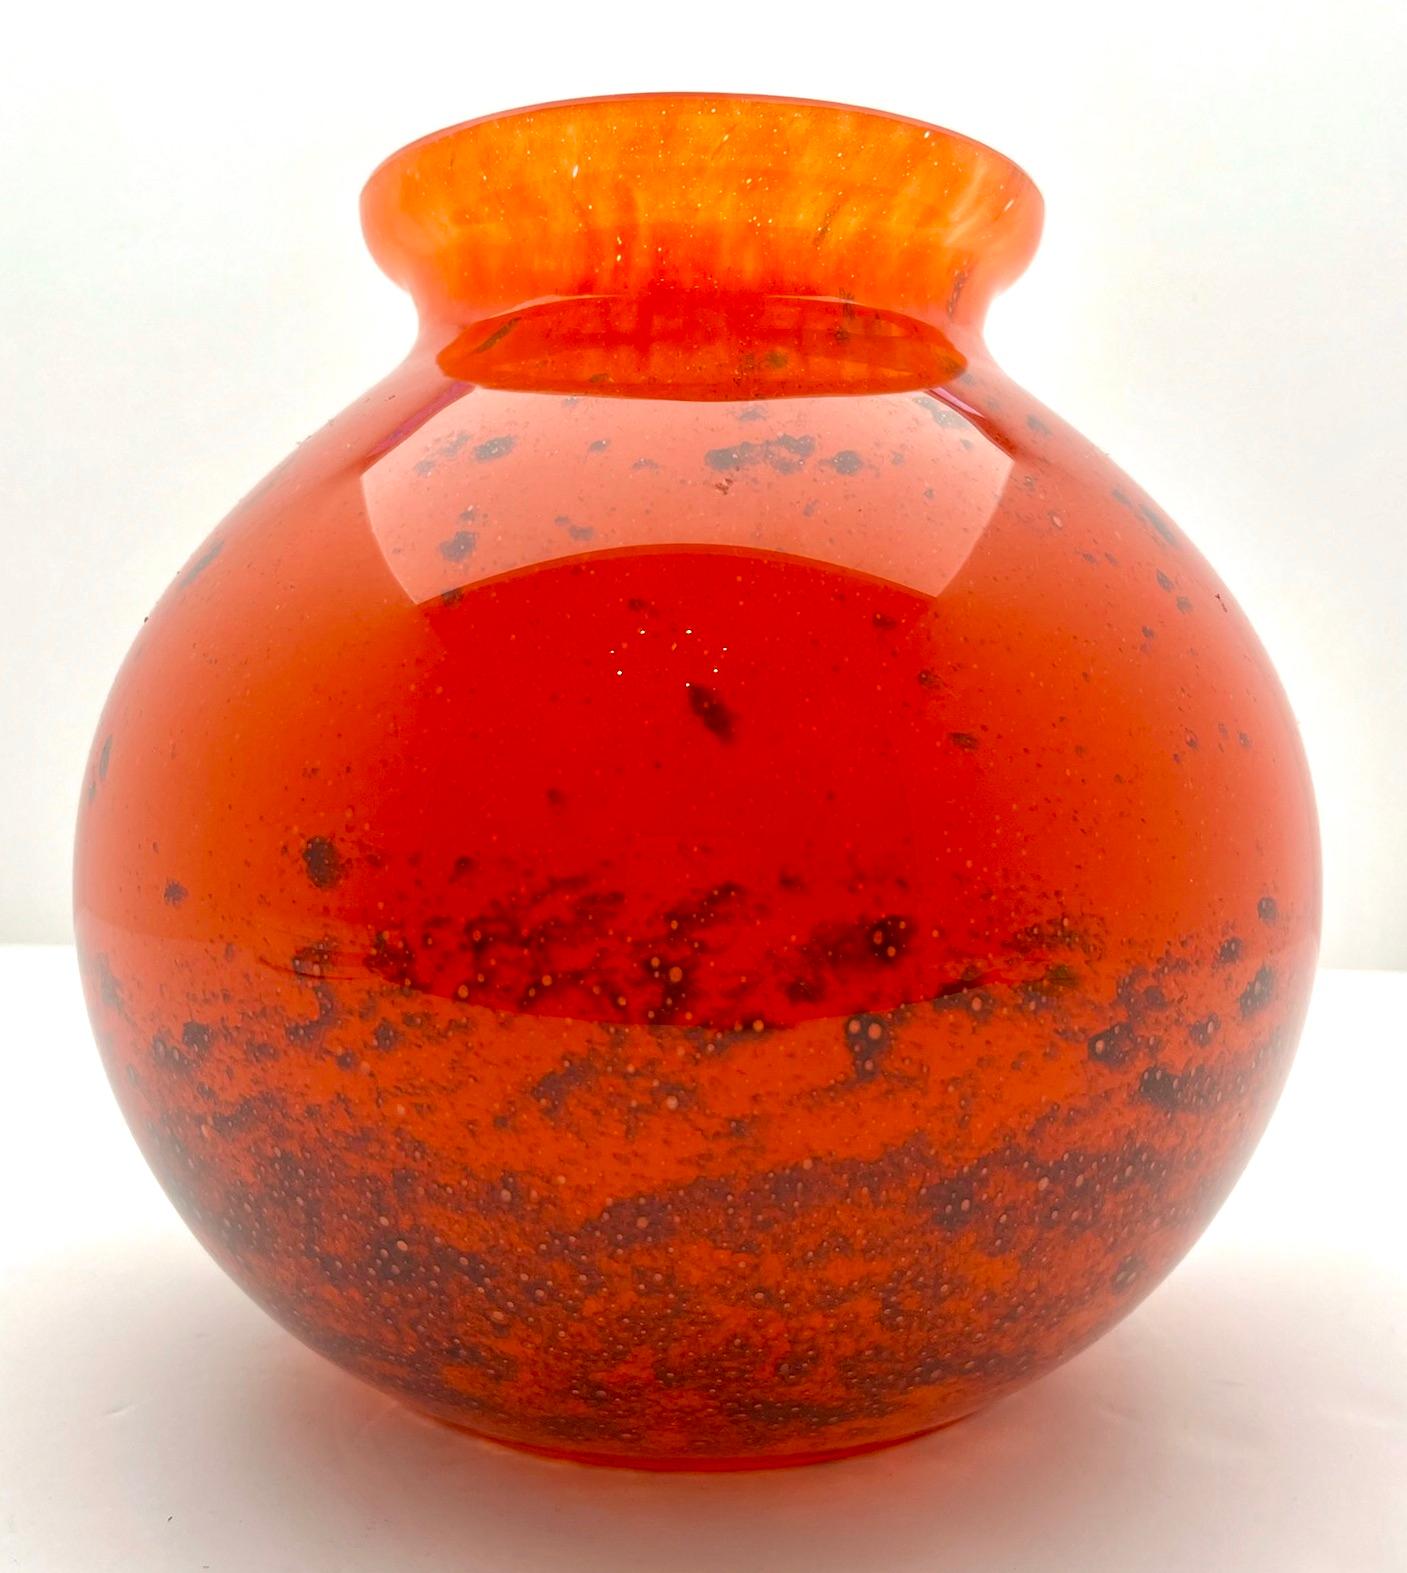 Hand-Crafted Ikora Art Glass Vase, Produced, by WMF in Germany, 1930s by Karl Wiedmann For Sale